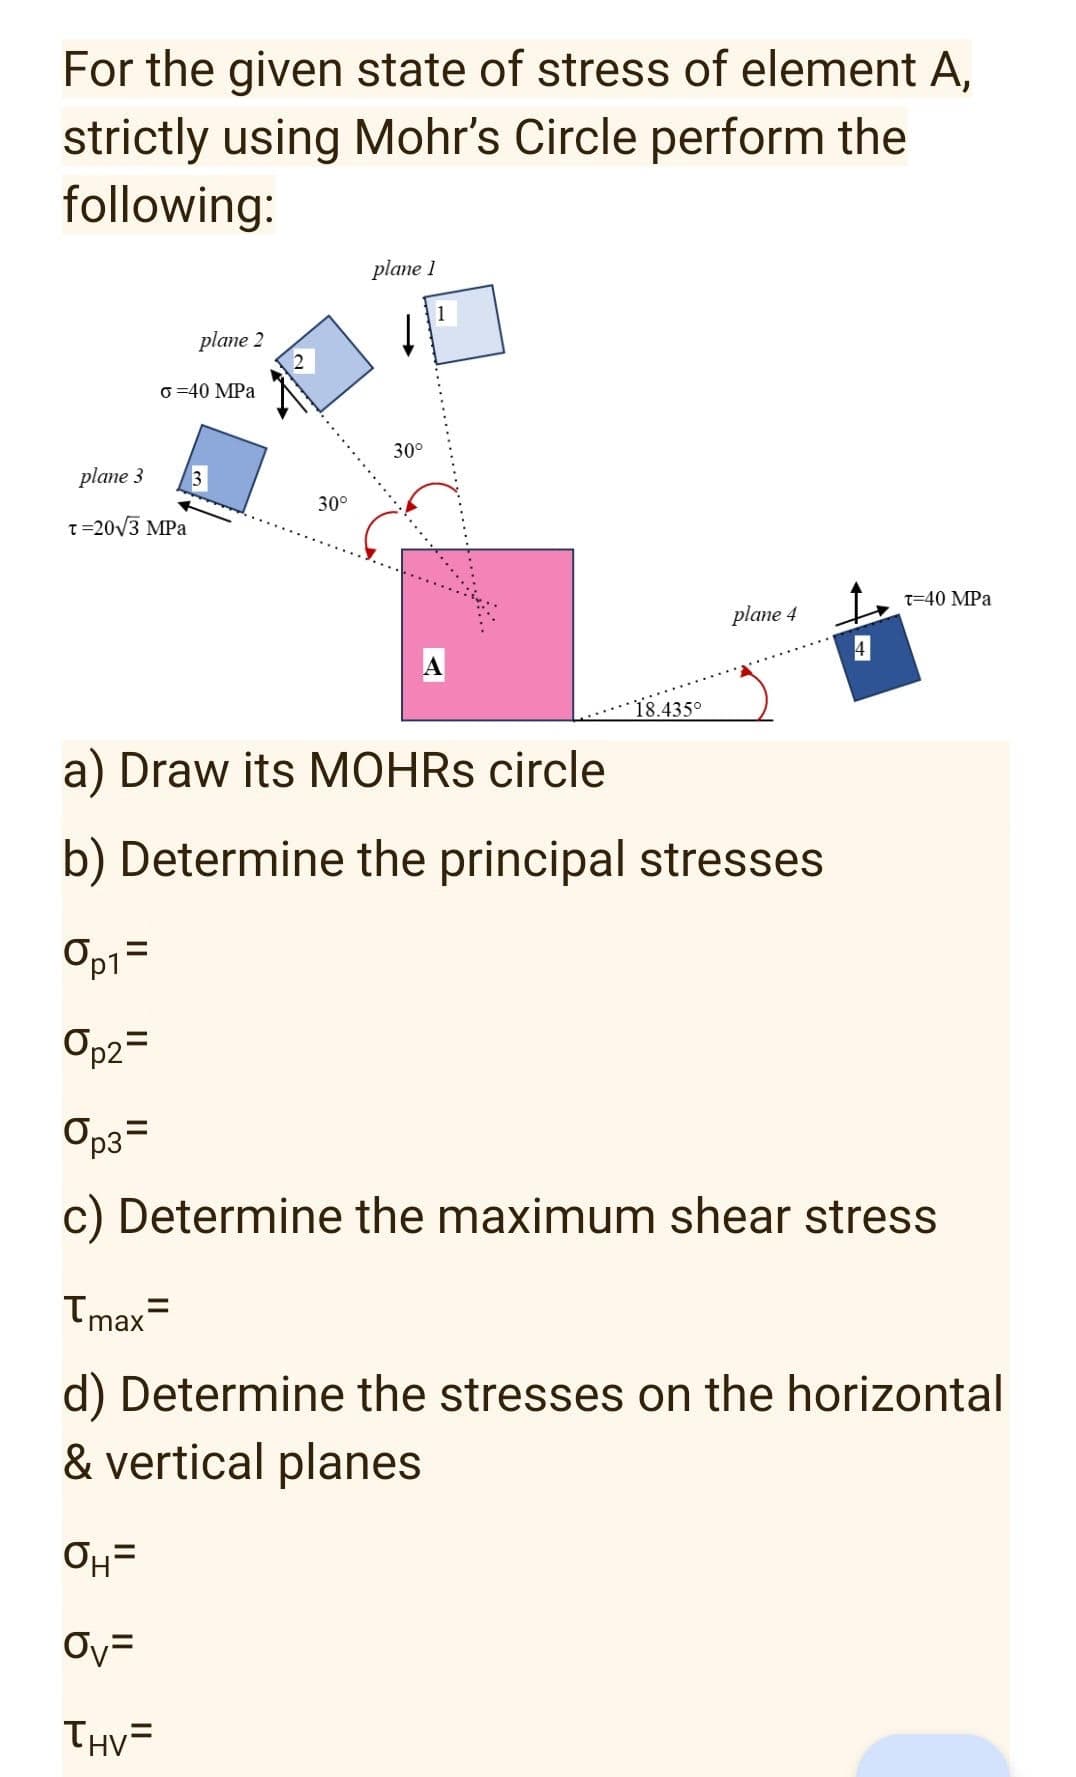 For the given state of stress of element A,
strictly using Mohr's Circle perform the
following:
plane 1
plane 2
T-40 MPa
plane 4
o=40 MPa
30°
1
plane 3
30°
T=20√3 MPa
4
18.435°
a) Draw its MOHRS circle
b) Determine the principal stresses
Op1=
Op2=
Op3=
c) Determine the maximum shear stress
Tmax=
d) Determine the stresses on the horizontal
& vertical planes
OH=
Ov=
THV=